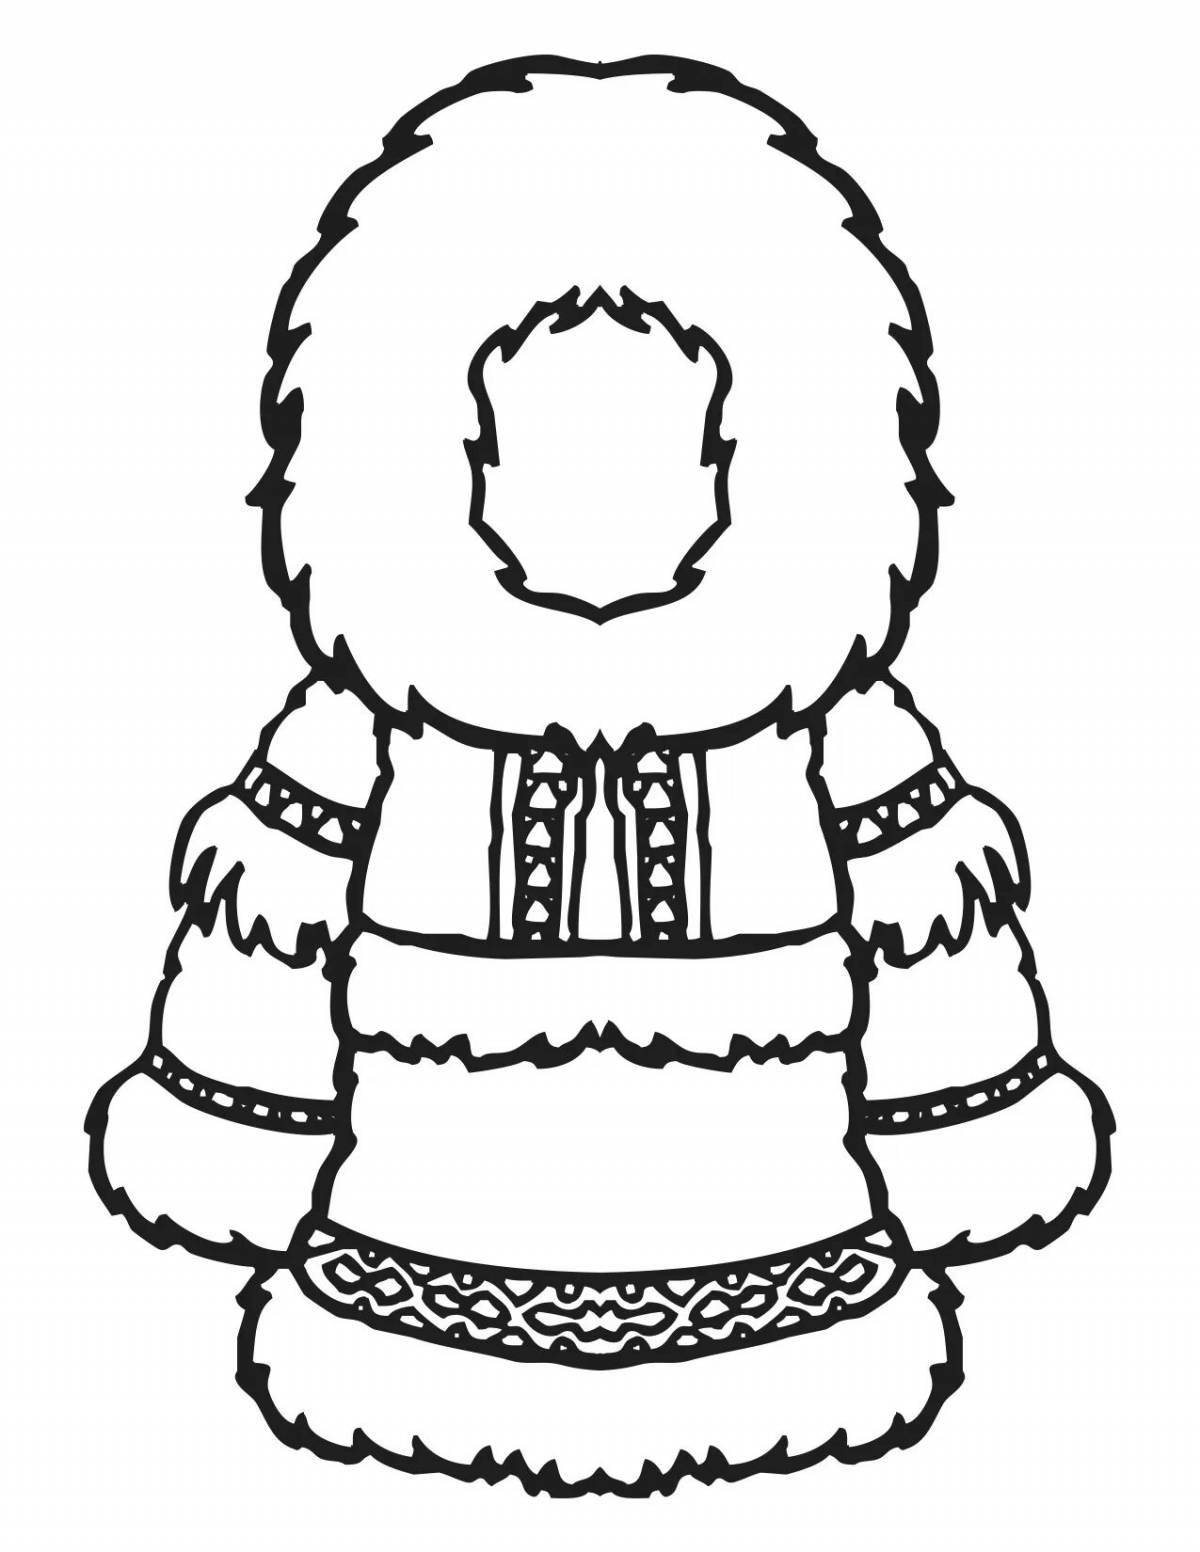 Coloring page spectacular coat for kids